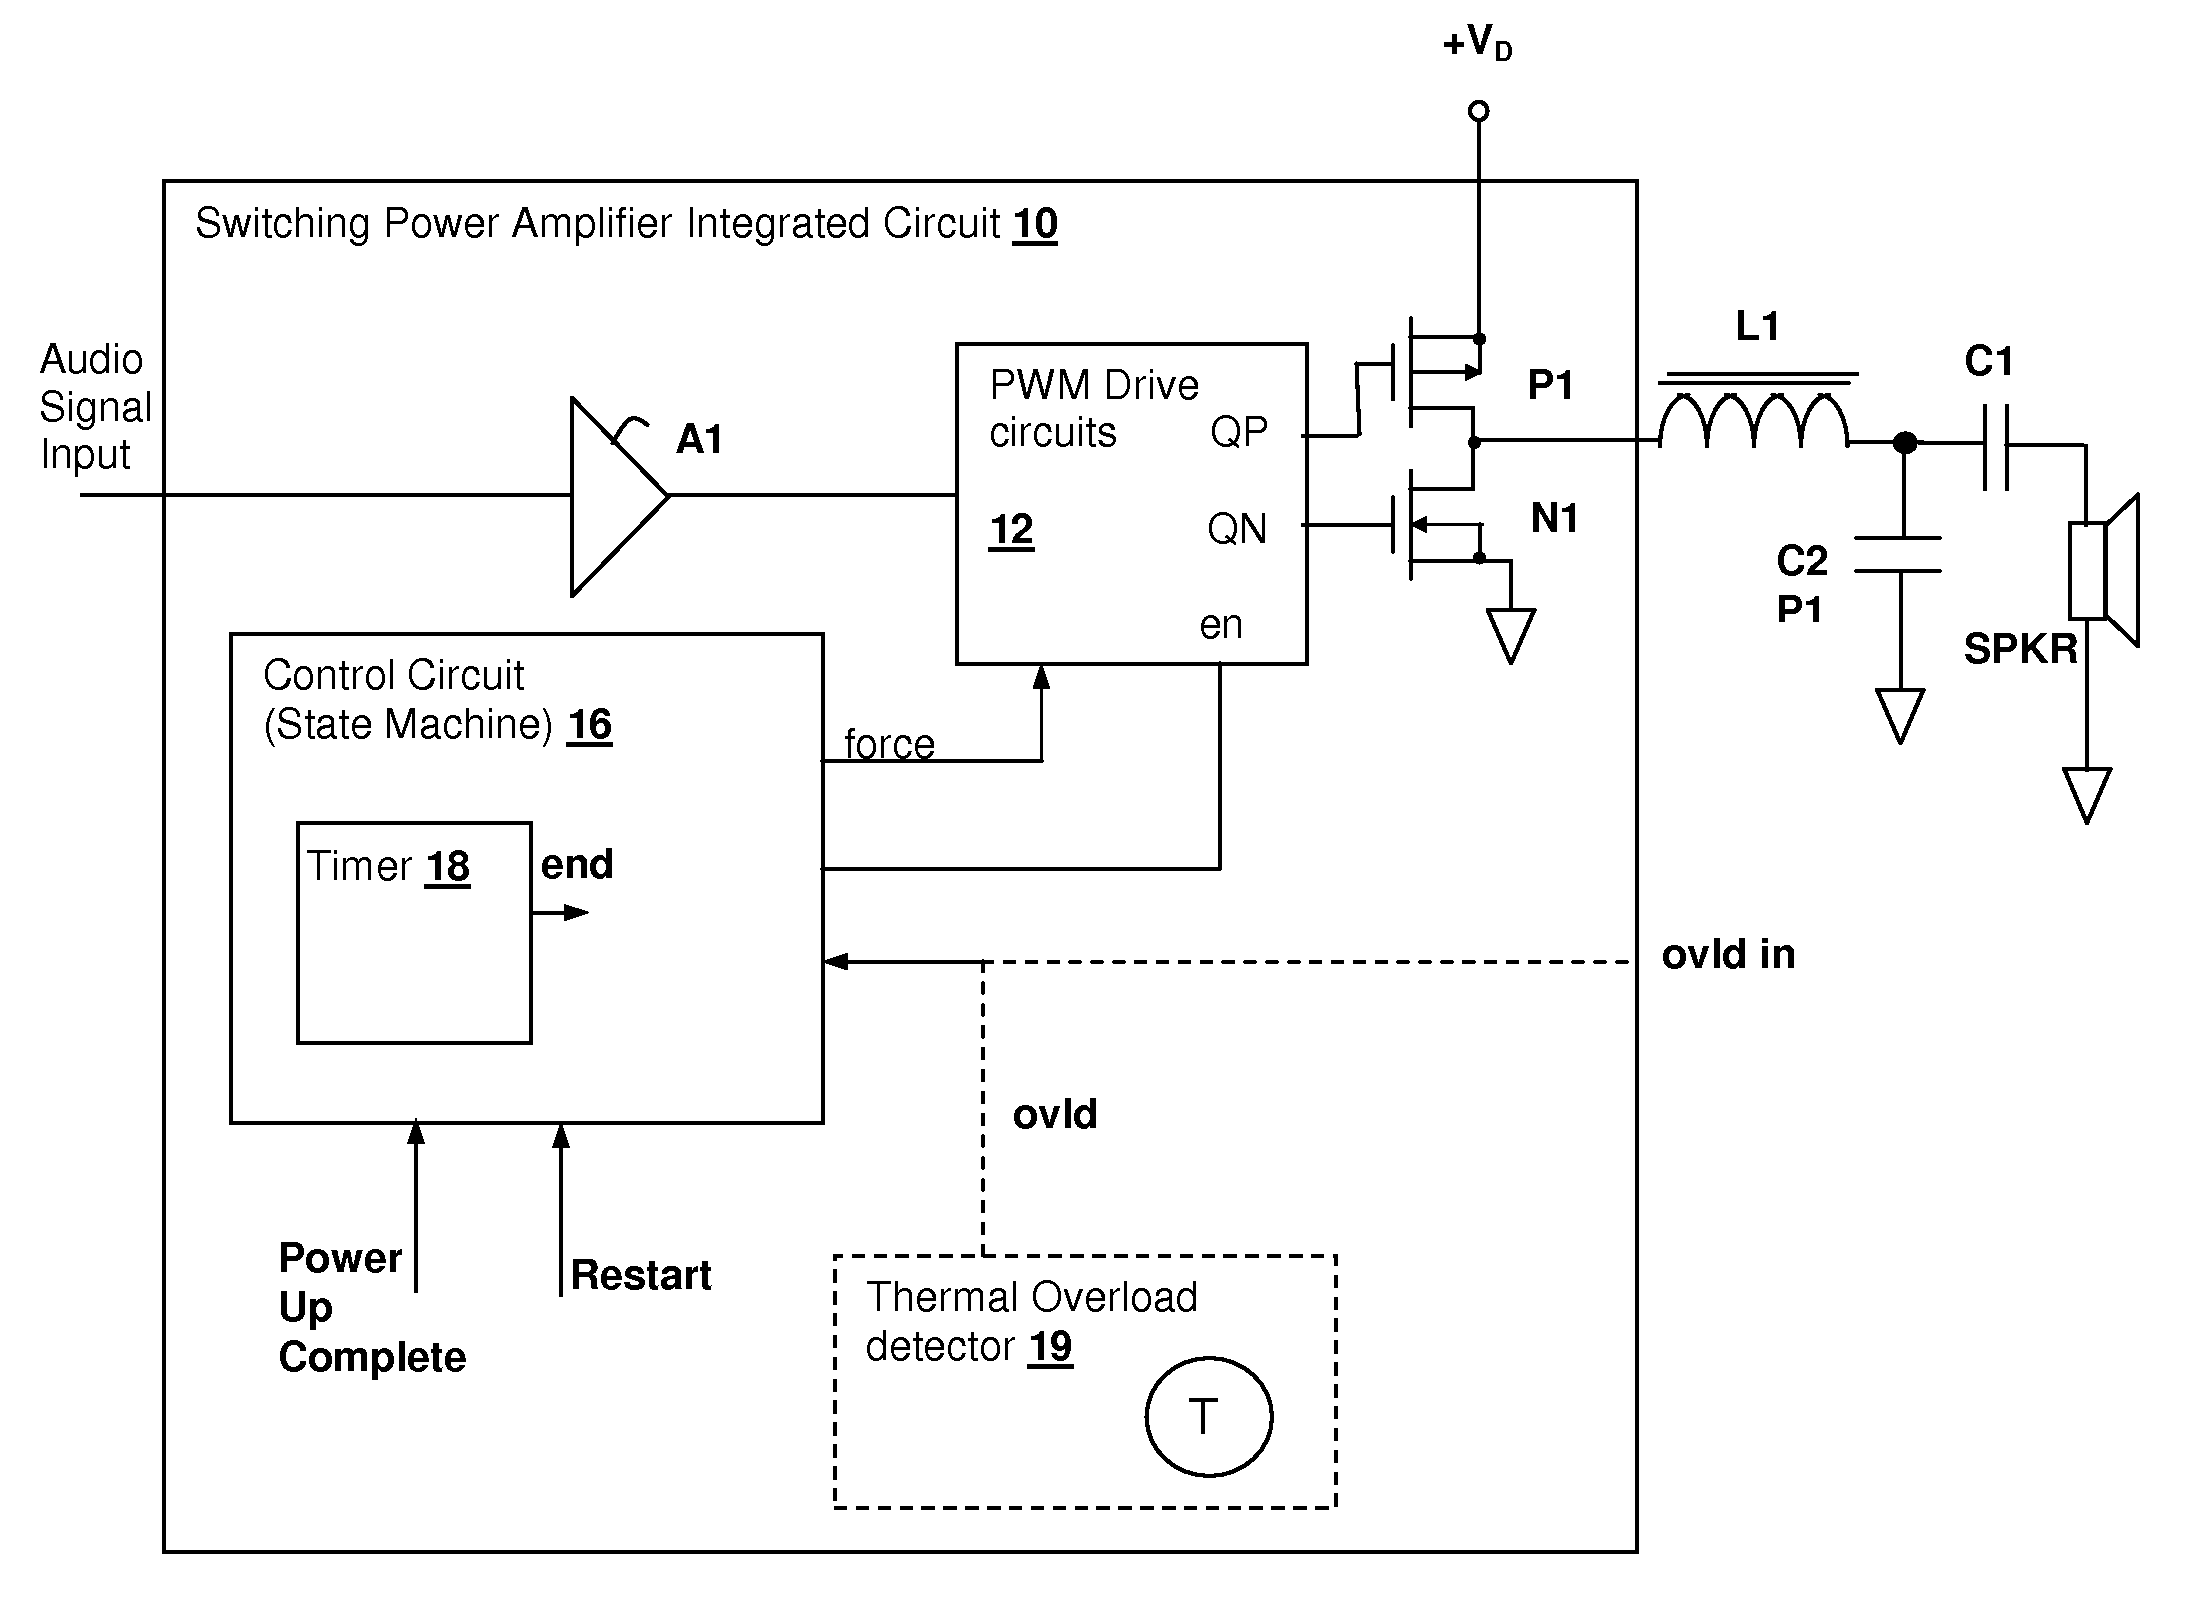 Thermal overload protection circuit and method for protecting switching power amplifier circuits